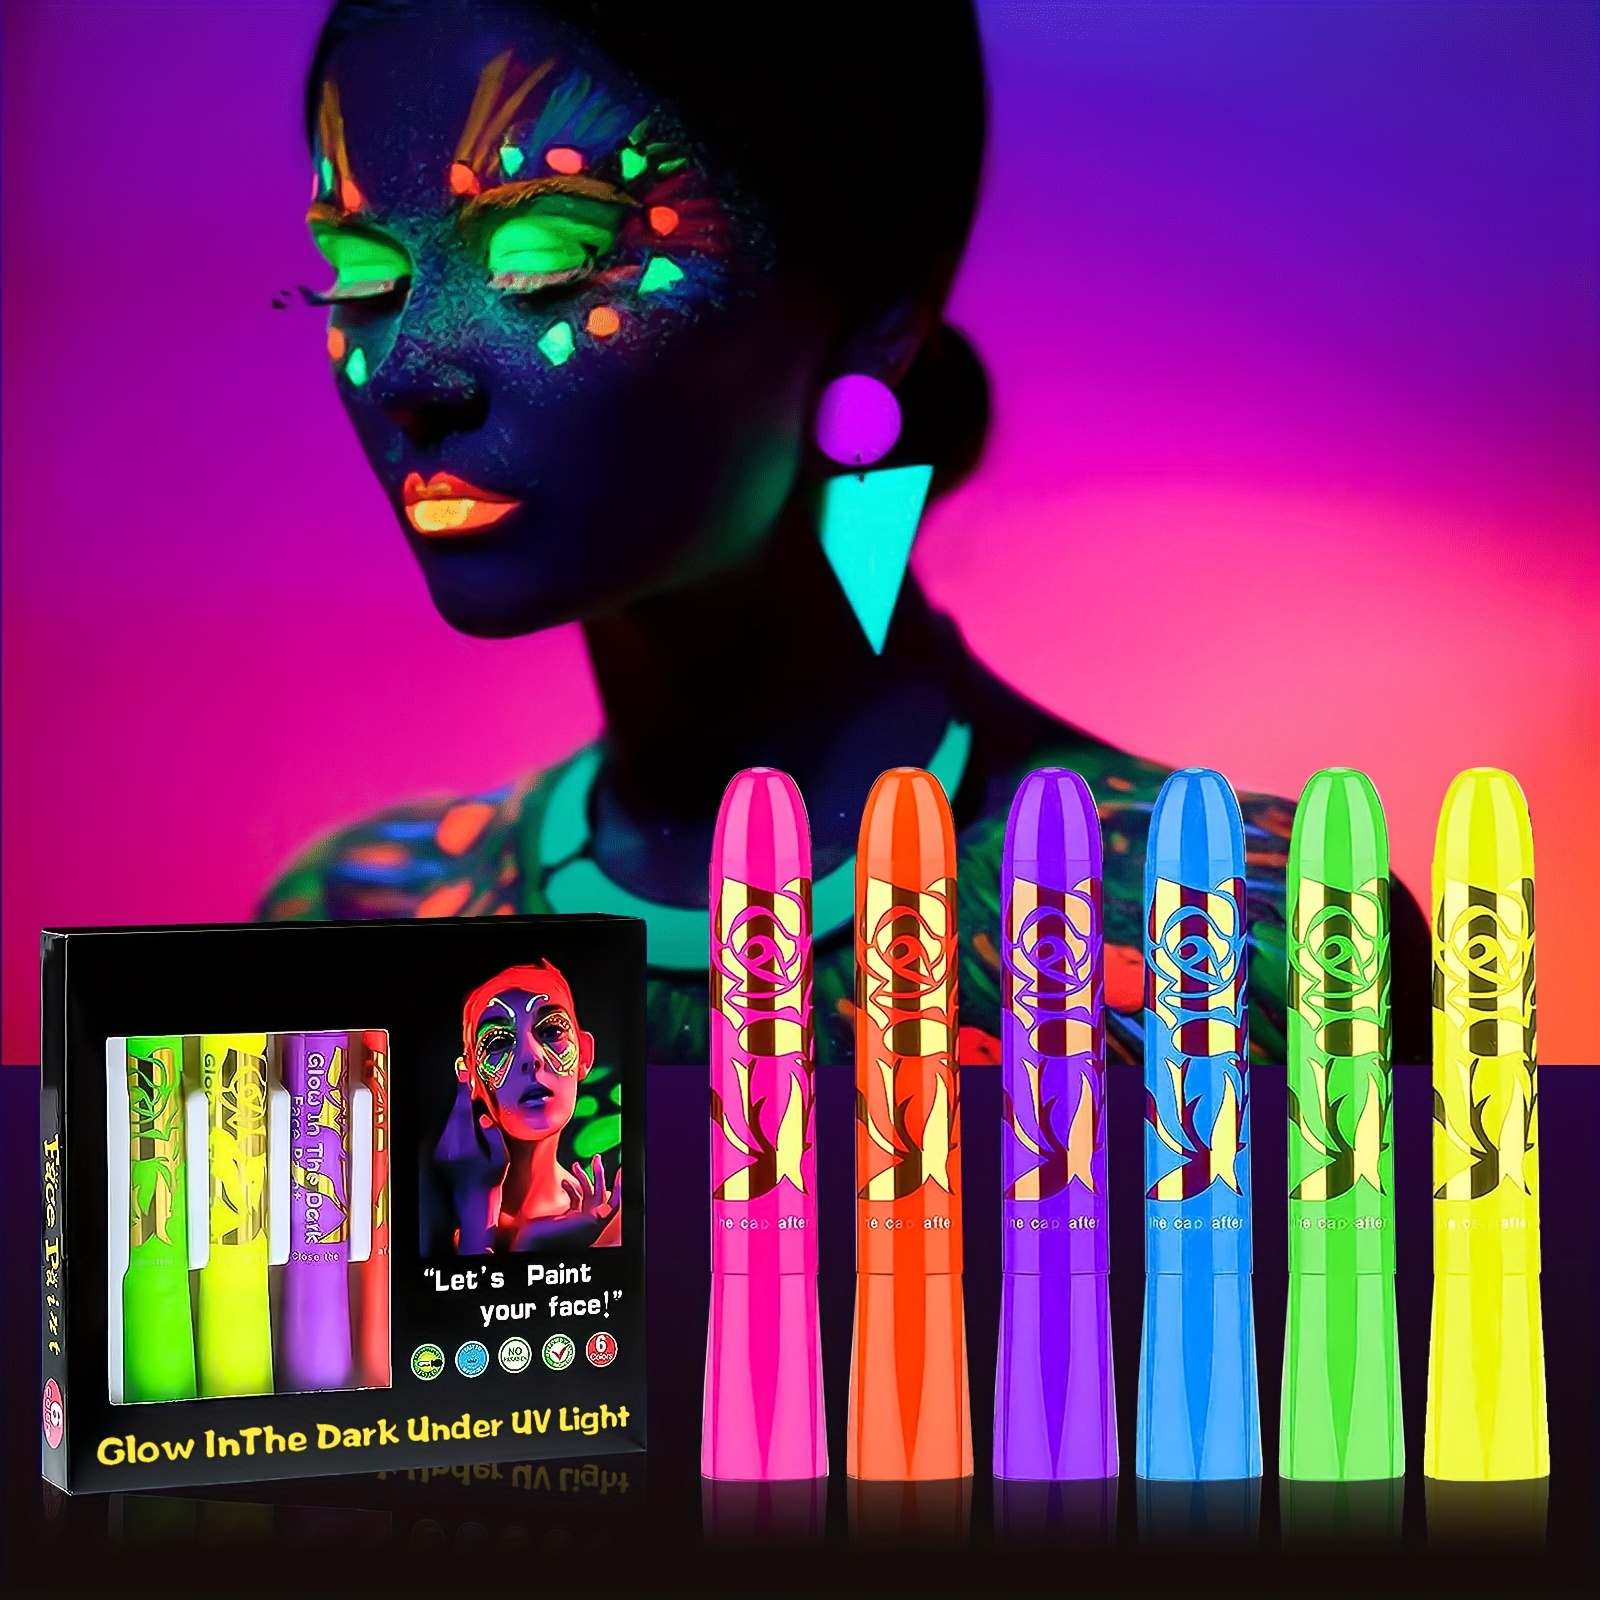 

6 Pcs Glow In The Dark Face Body Paint, Uv Black Light Glow Makeup Kit For Adult, Non-toxic Fluorescent Face Paints Crayons For Birthday Party Halloween Masquerade Mardi Gras Makeup